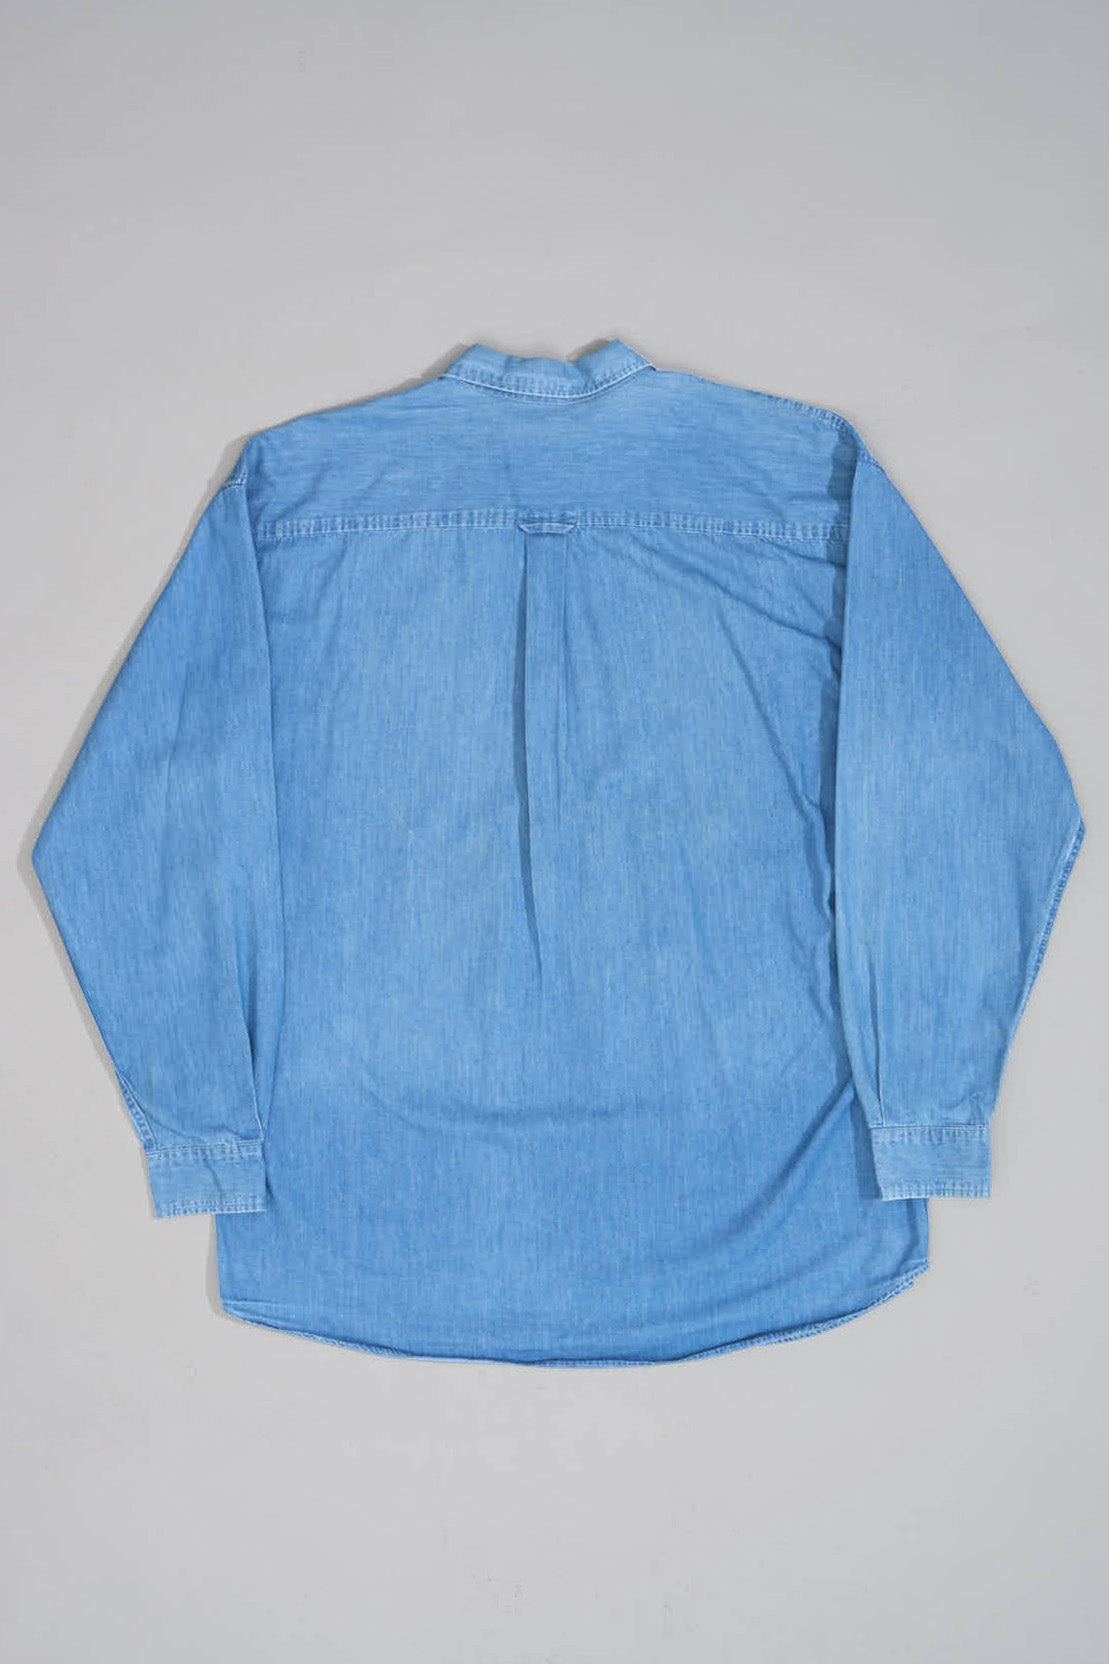 'OF COURSE I DON'T LOOK BUSY' DENIM Shirt - XXL